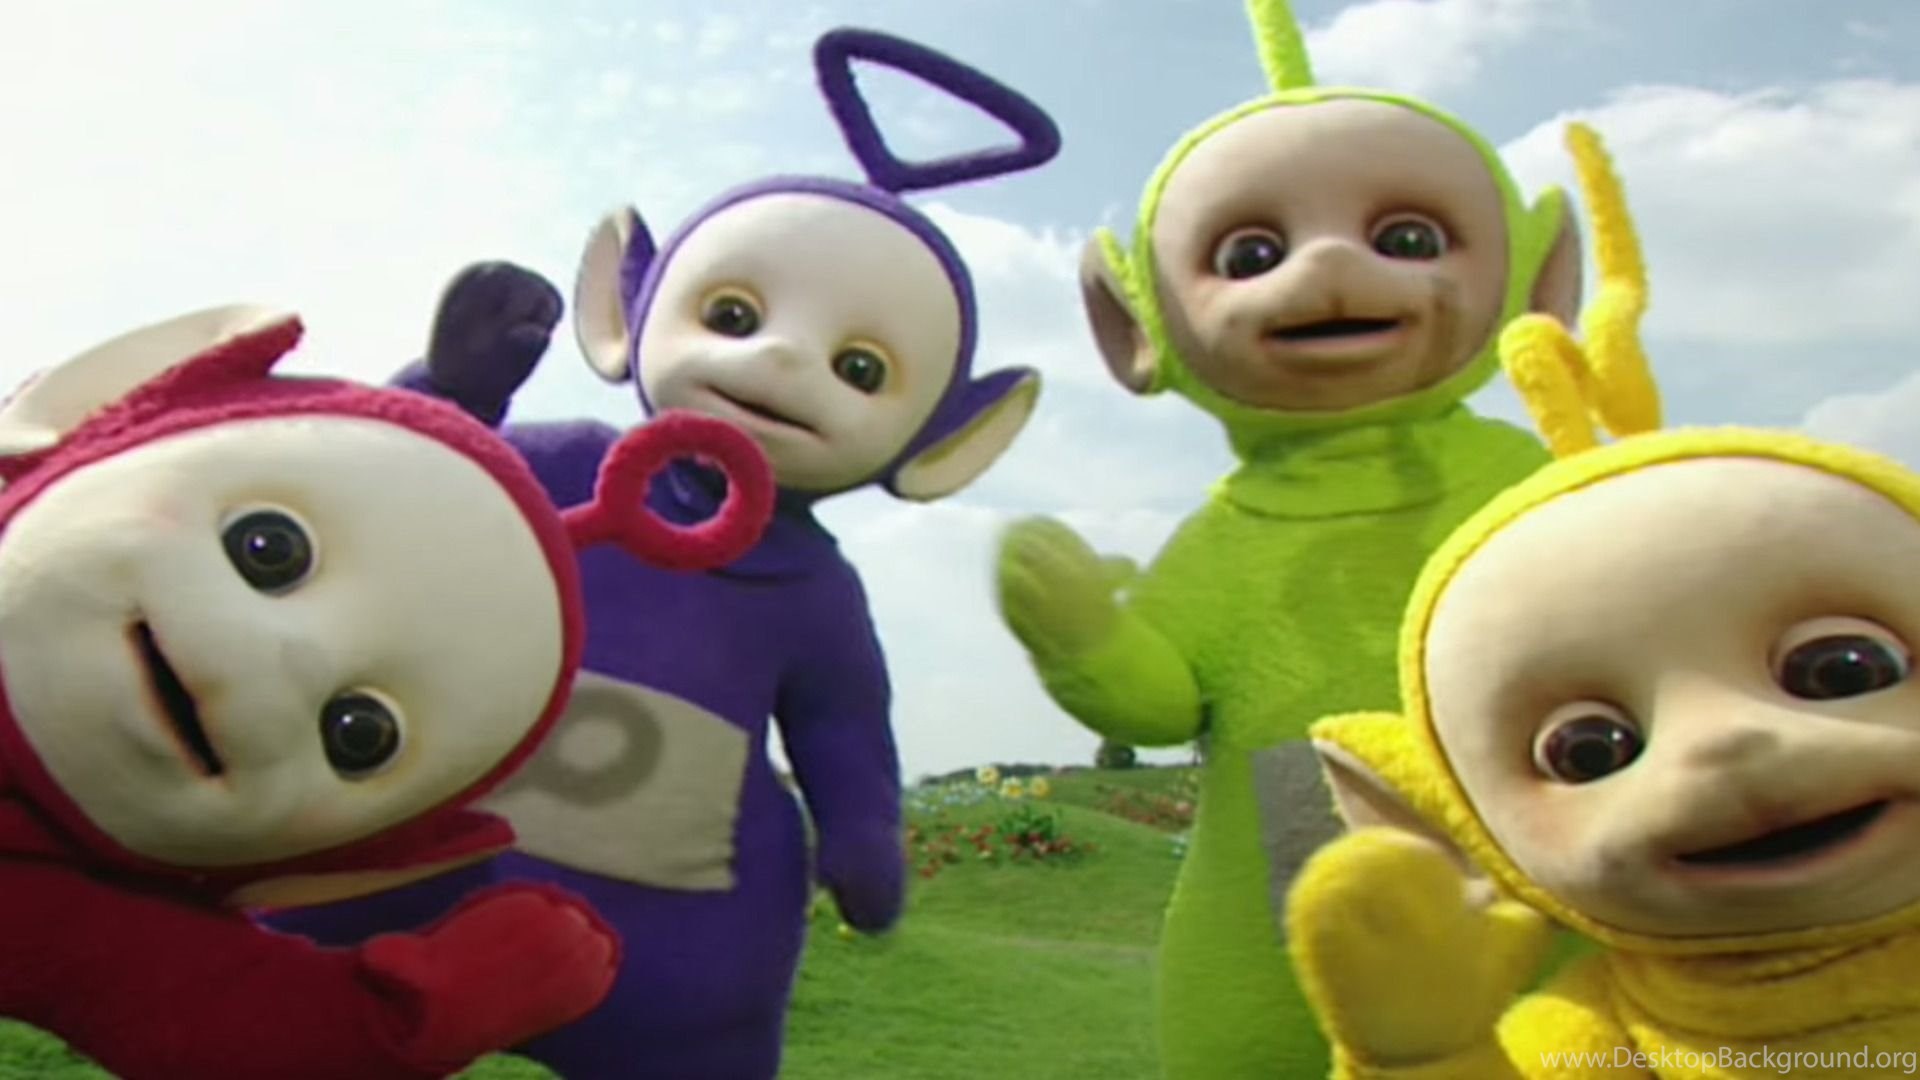 1920x1080 Man In Teletubby Costume Breaks Into Home, Stea.